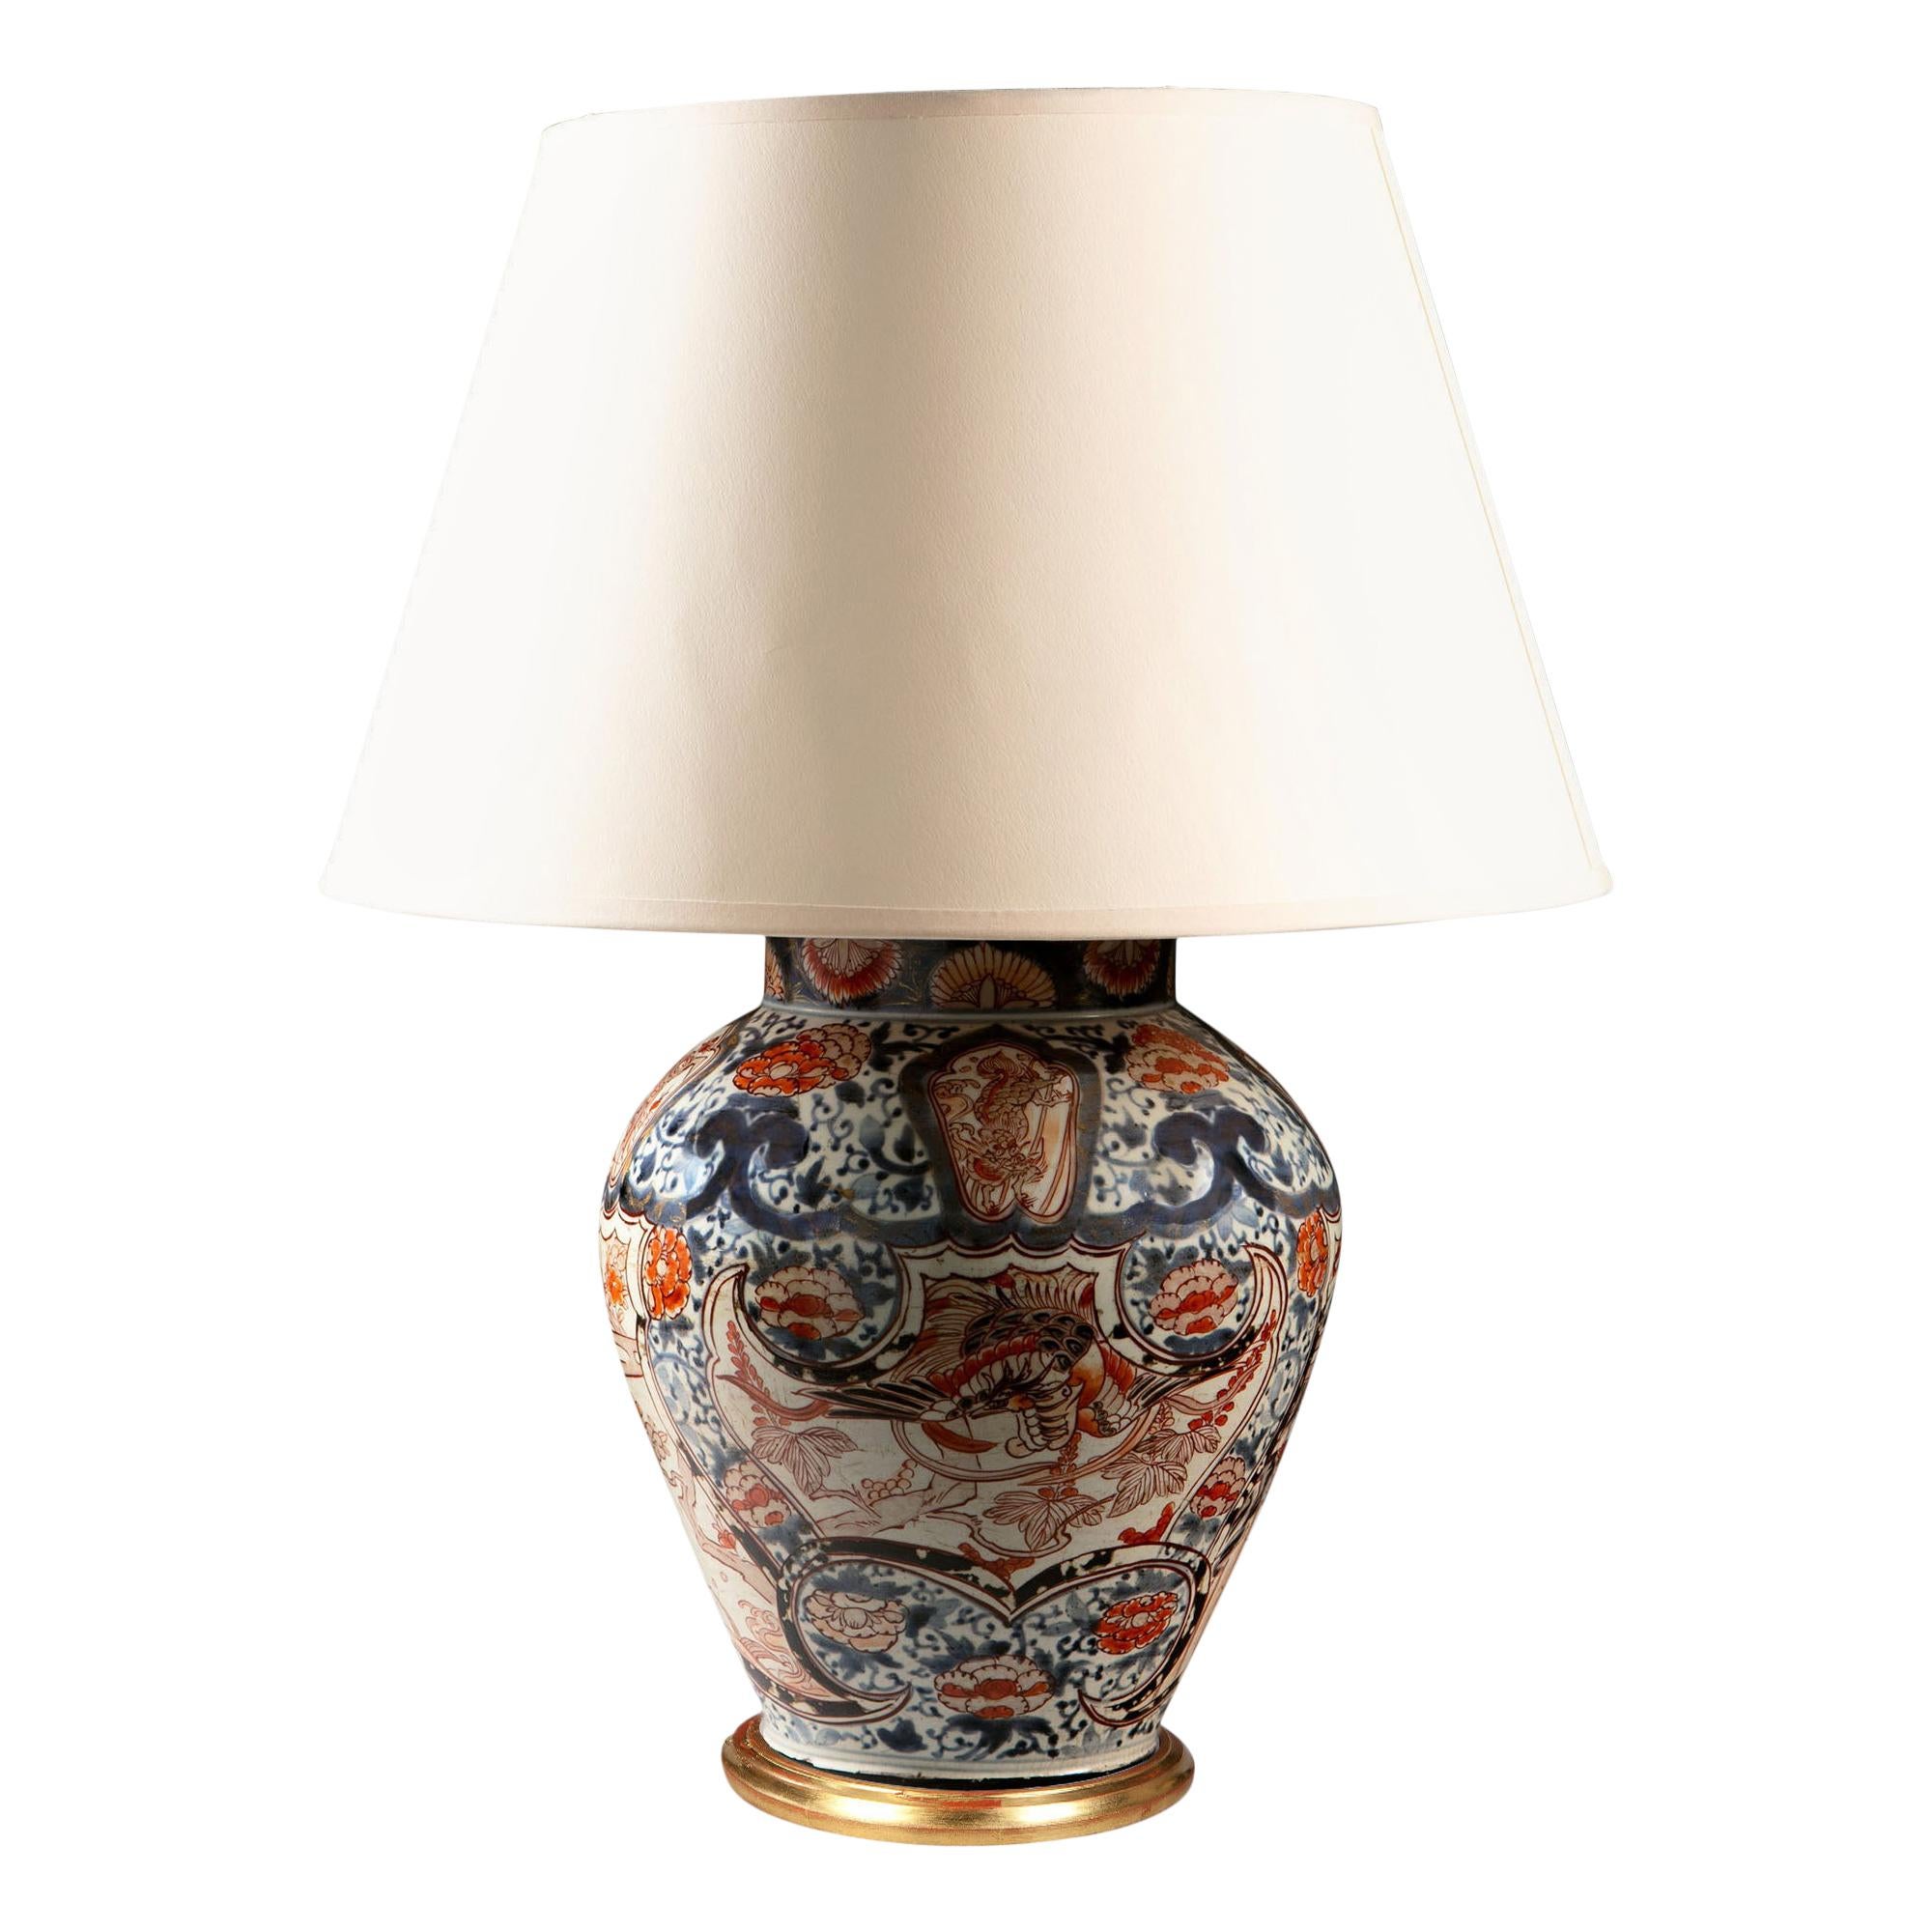 Mid-19th Century Imari Vase as a Table Lamp, Mounted with Giltwood Base